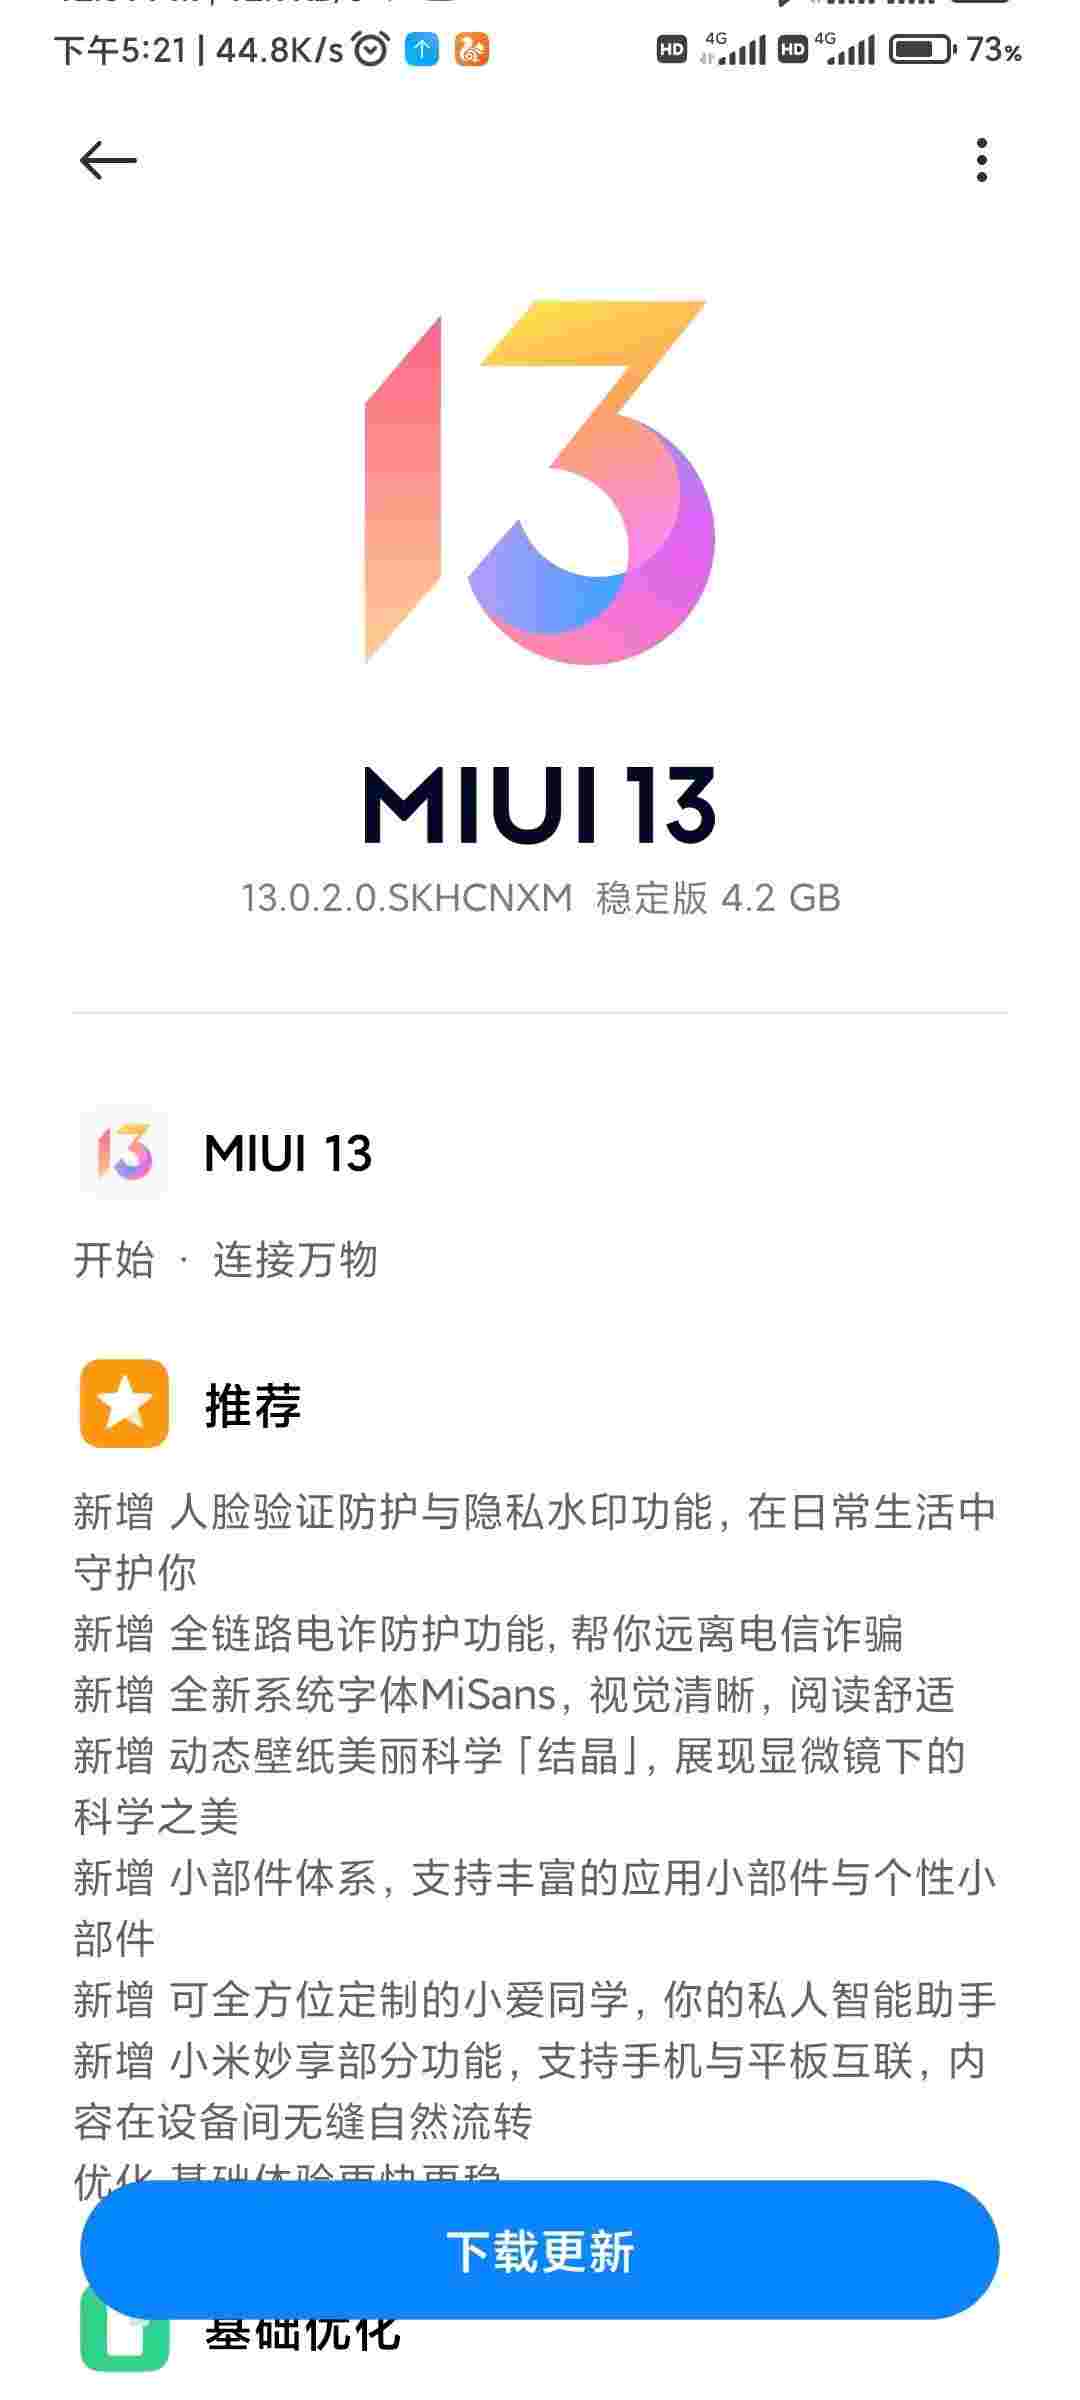 Redmi K40 / POCO F3 stable Android 12-based MIUI 13 update